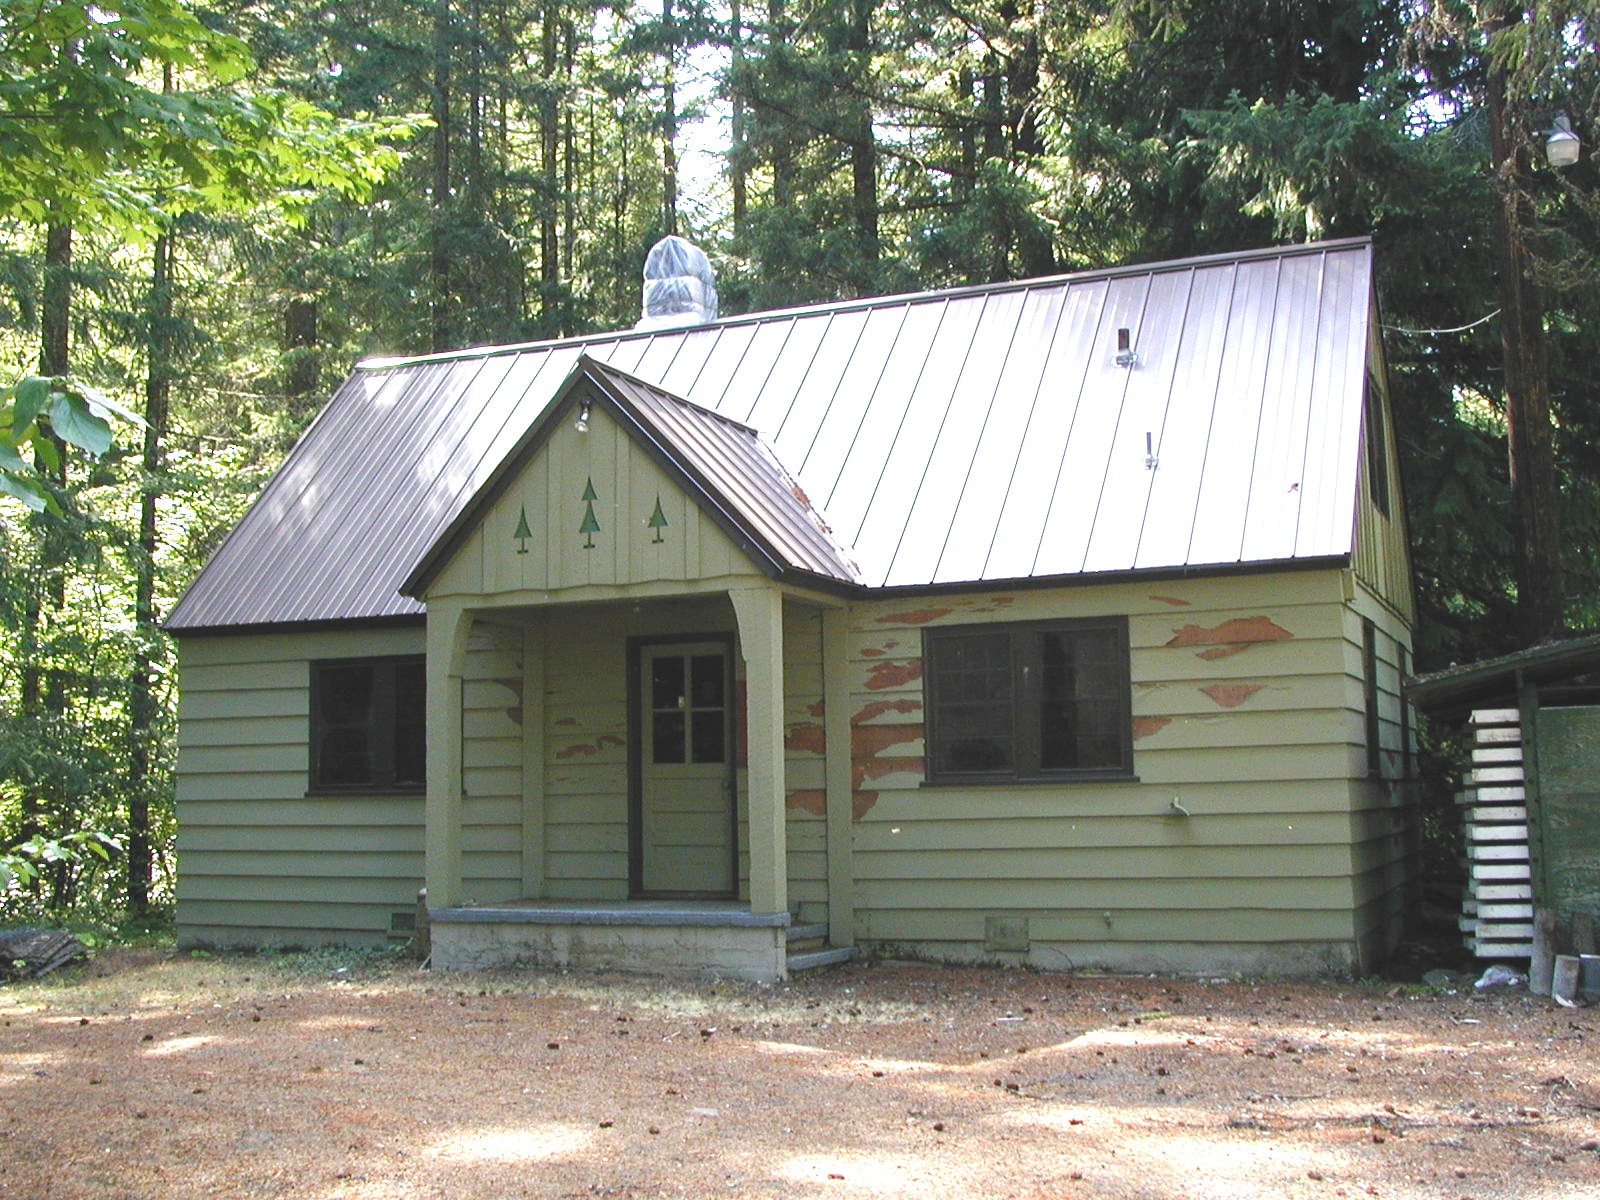 Willard Tool House will be moved 25 miles through the Gifford Pinchot National Forest to Peterson Prairie.